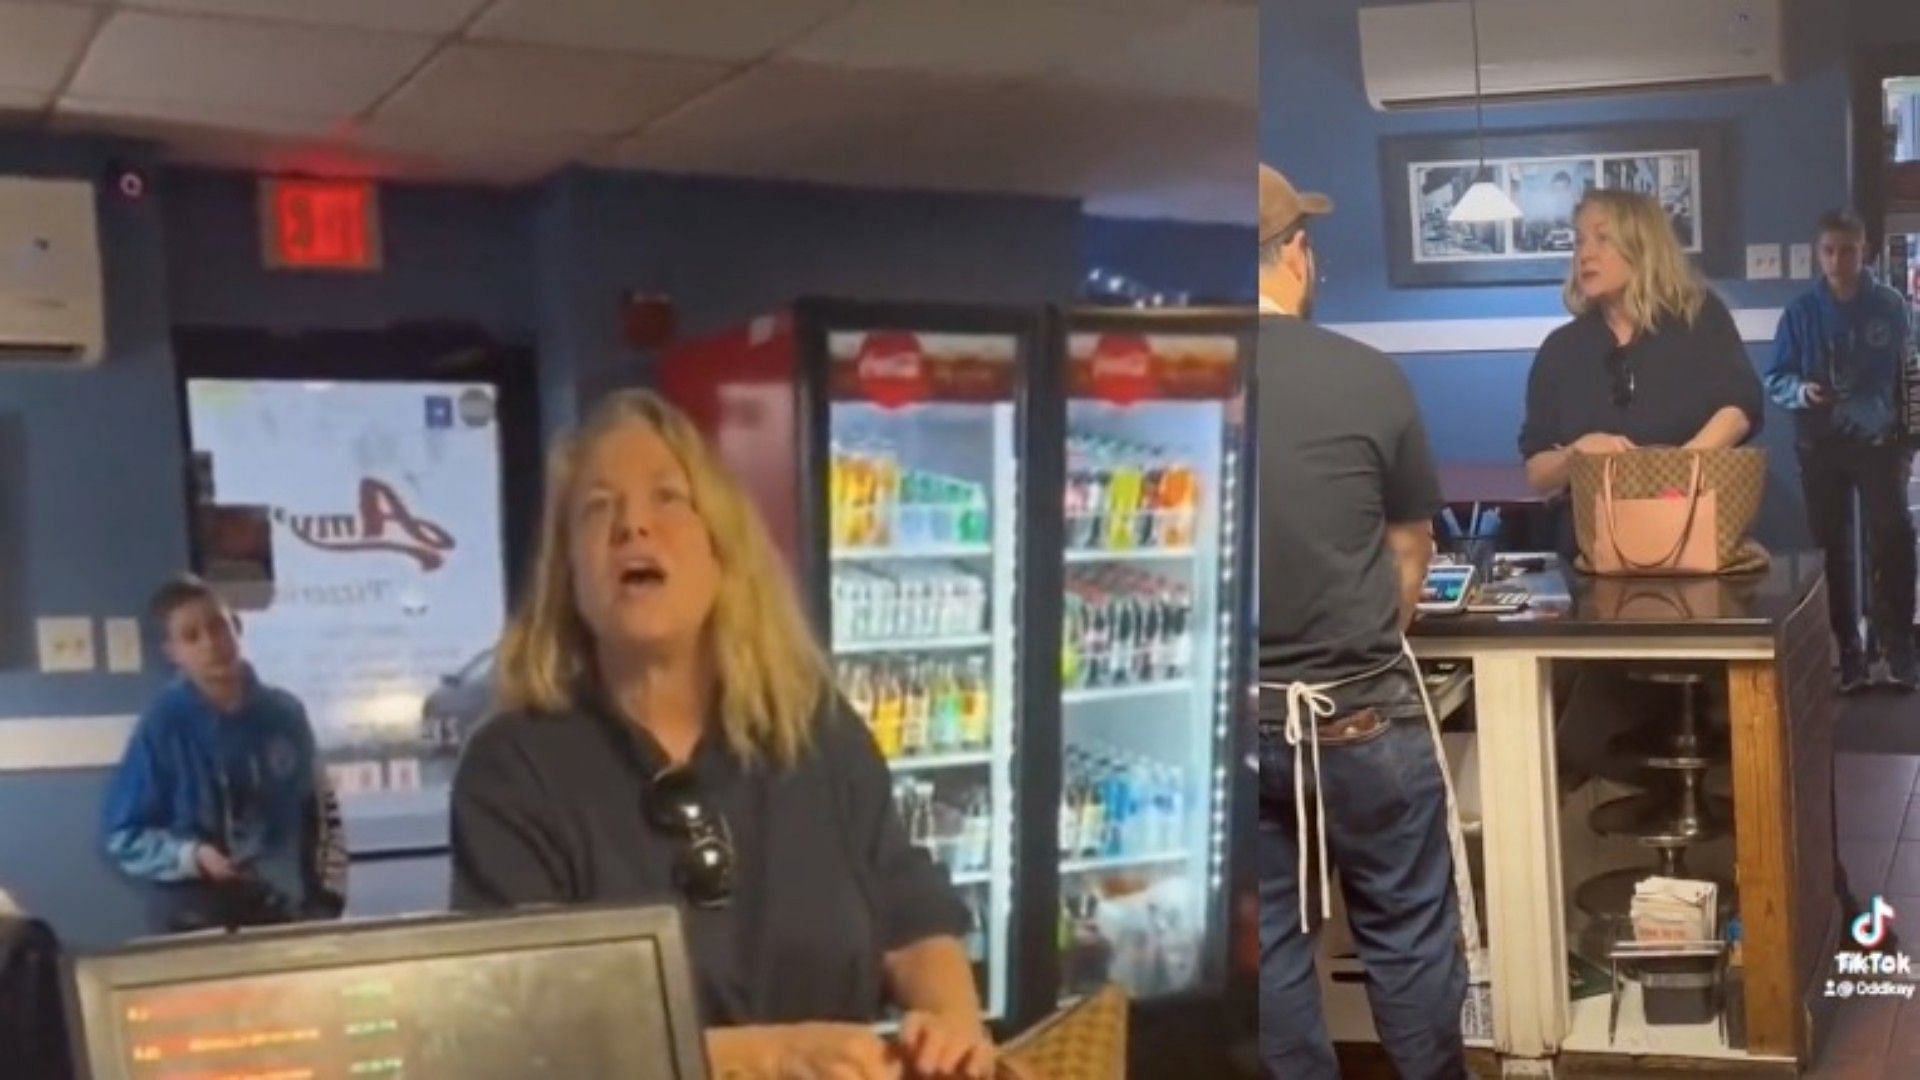 Her ancestors were the first Karens": Amy's Pizzeria Hatboro racist rant  video sparks outrage